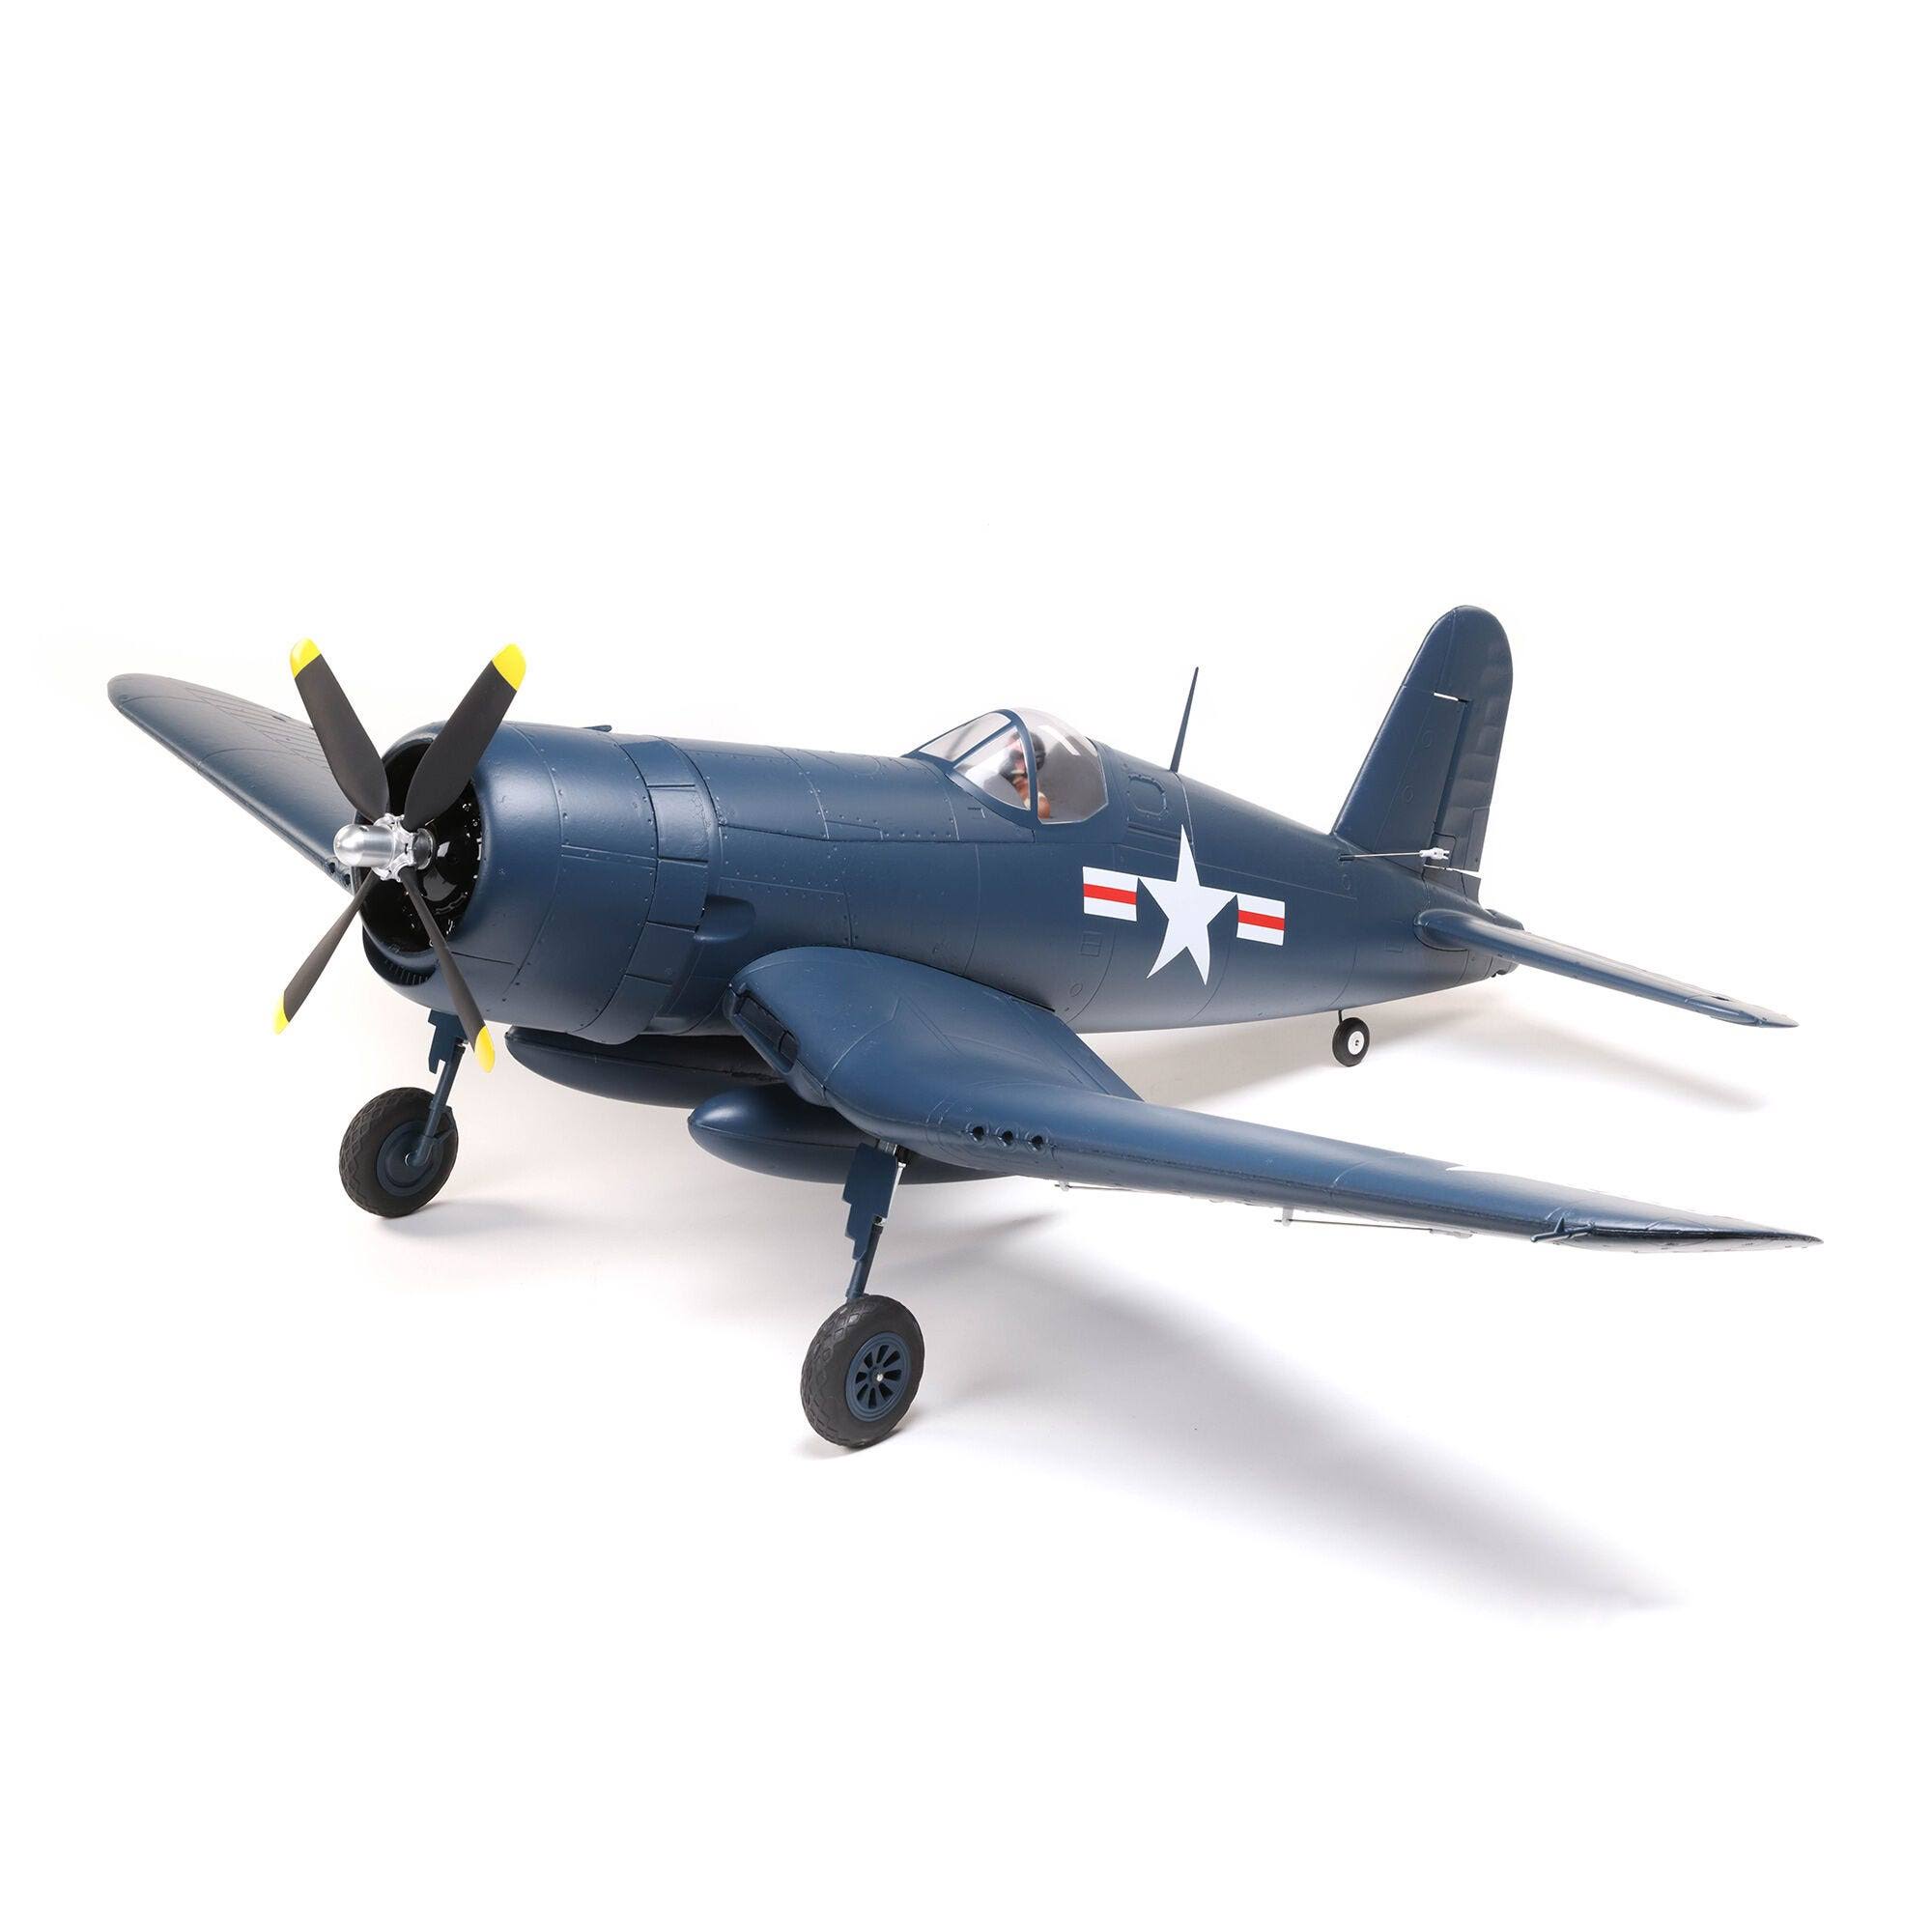 E-flite RC Airplane F4U-4 Corsair 1.2m BNF Basic (Transmitter, Battery and Charger Not Included) with AS3X and Safe Select, EFL18550